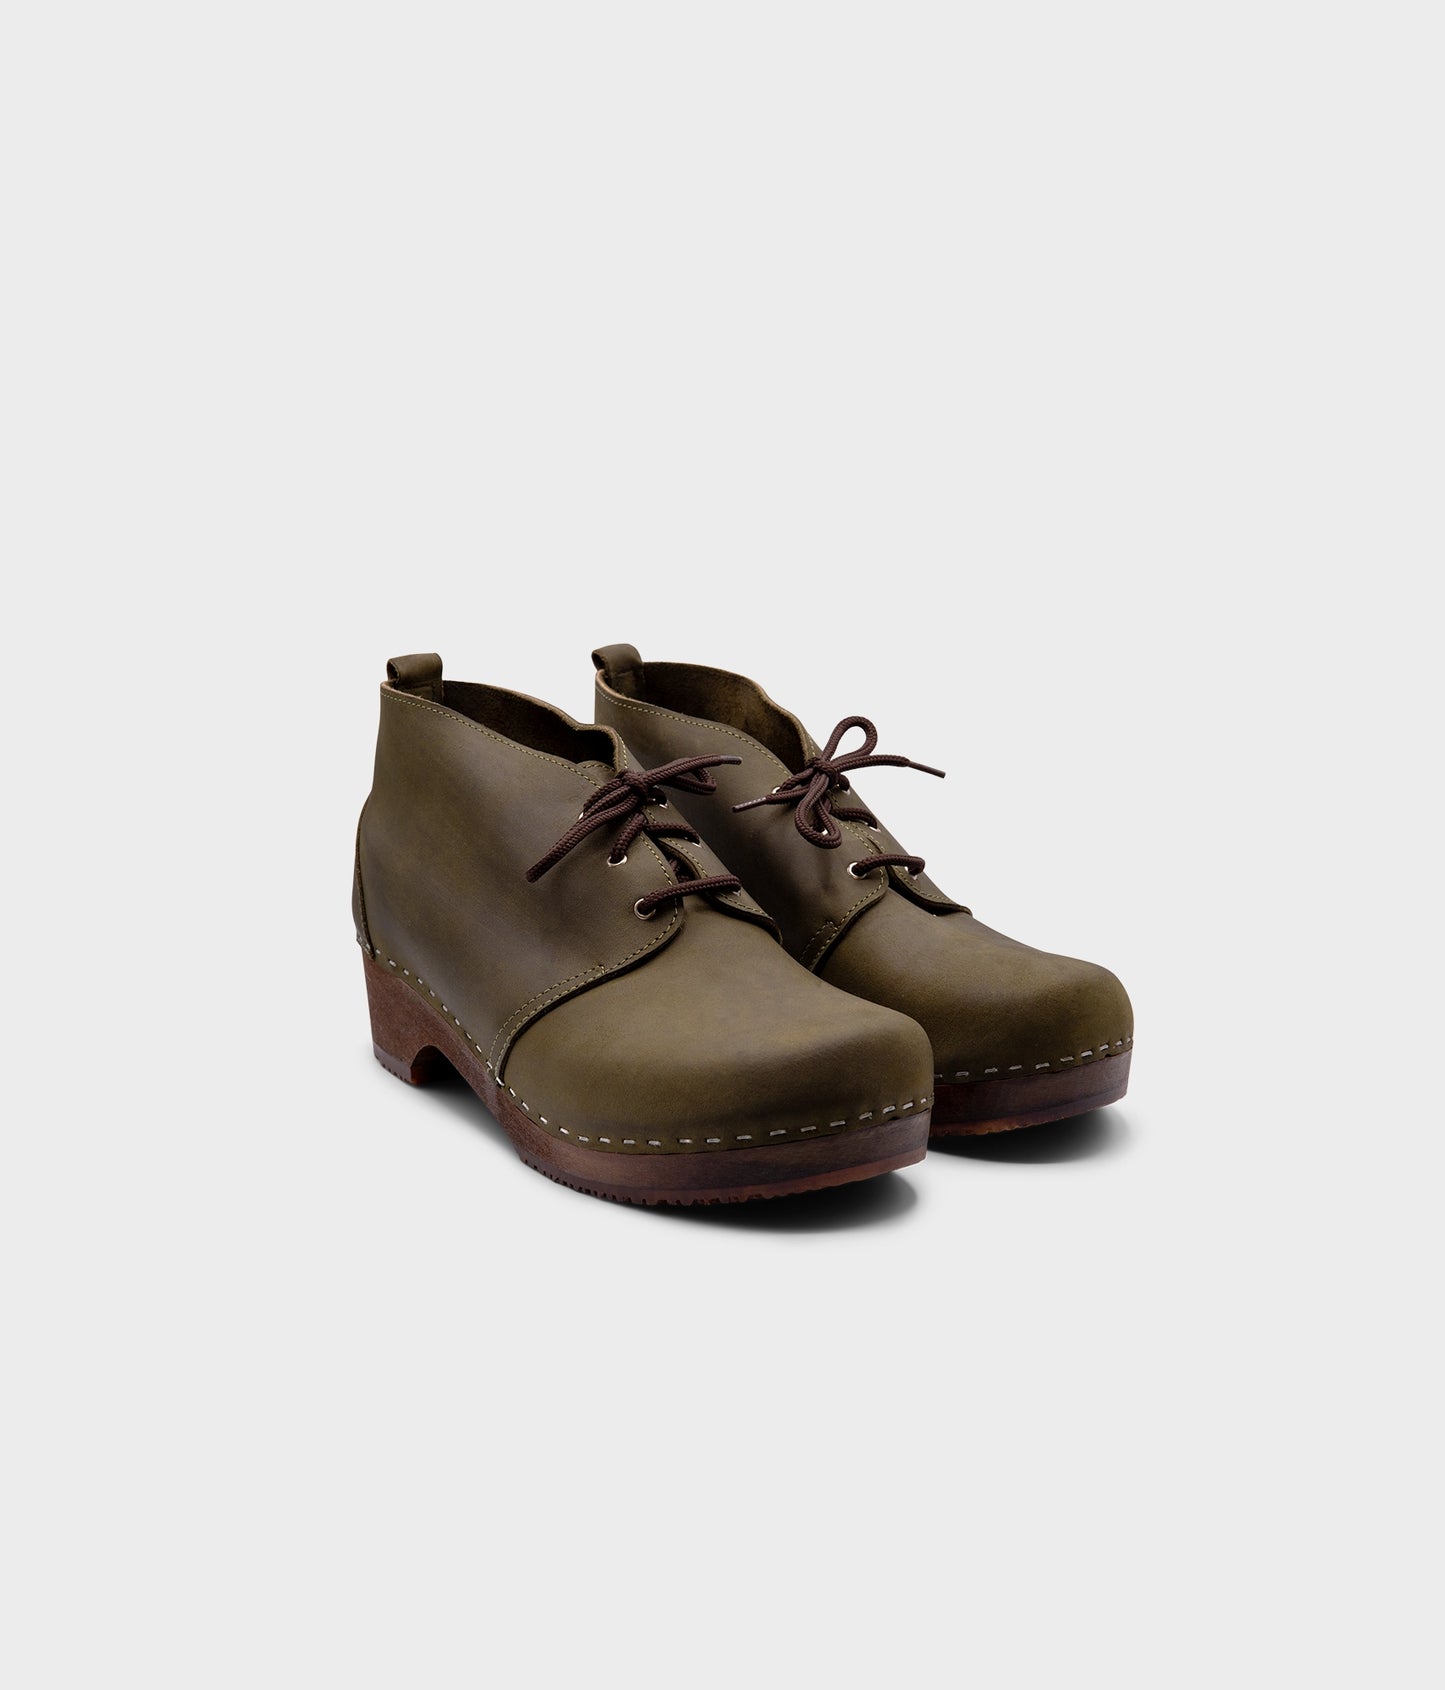 low heeled mens chukka clog boots in olive green nubuck leather stapled on a dark wooden base with brown laces